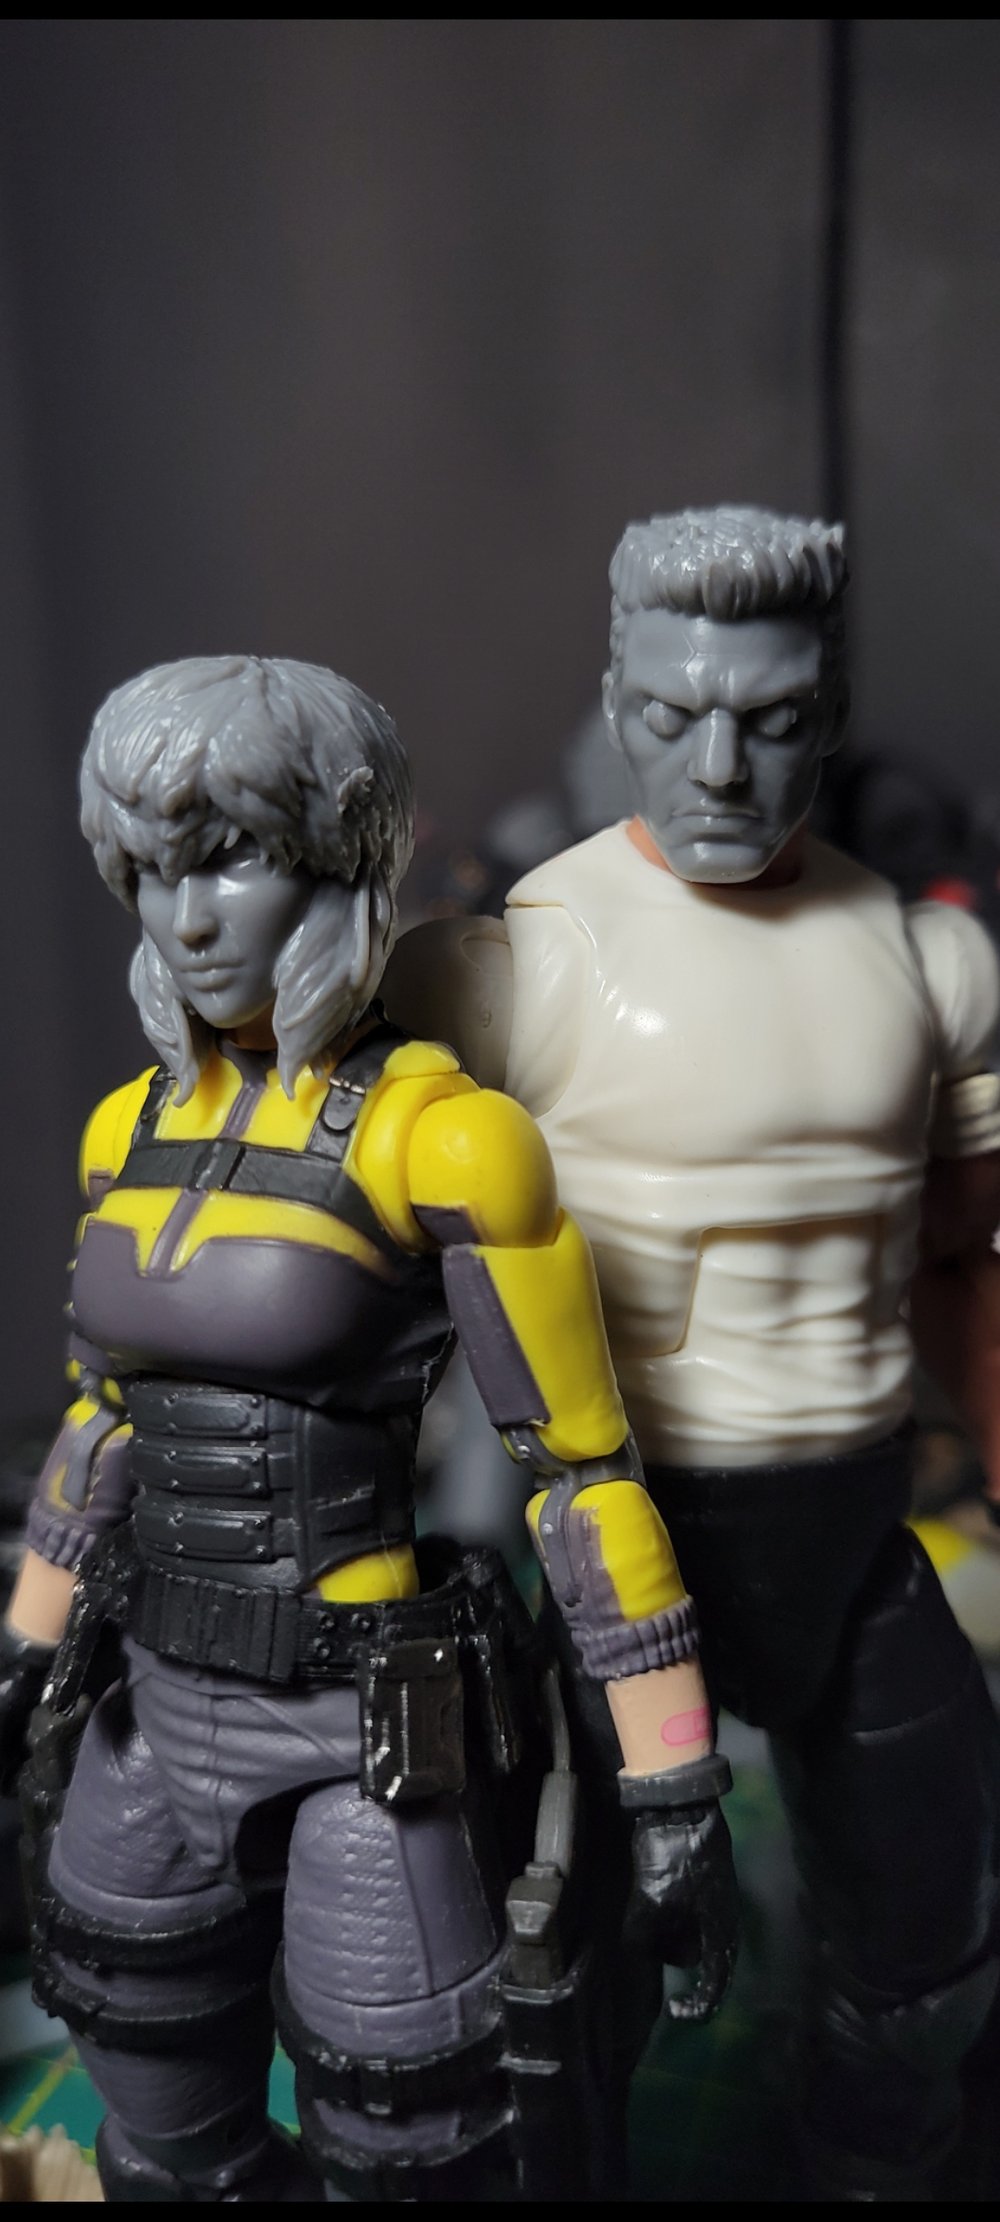 Ghost in the shell headsculpts